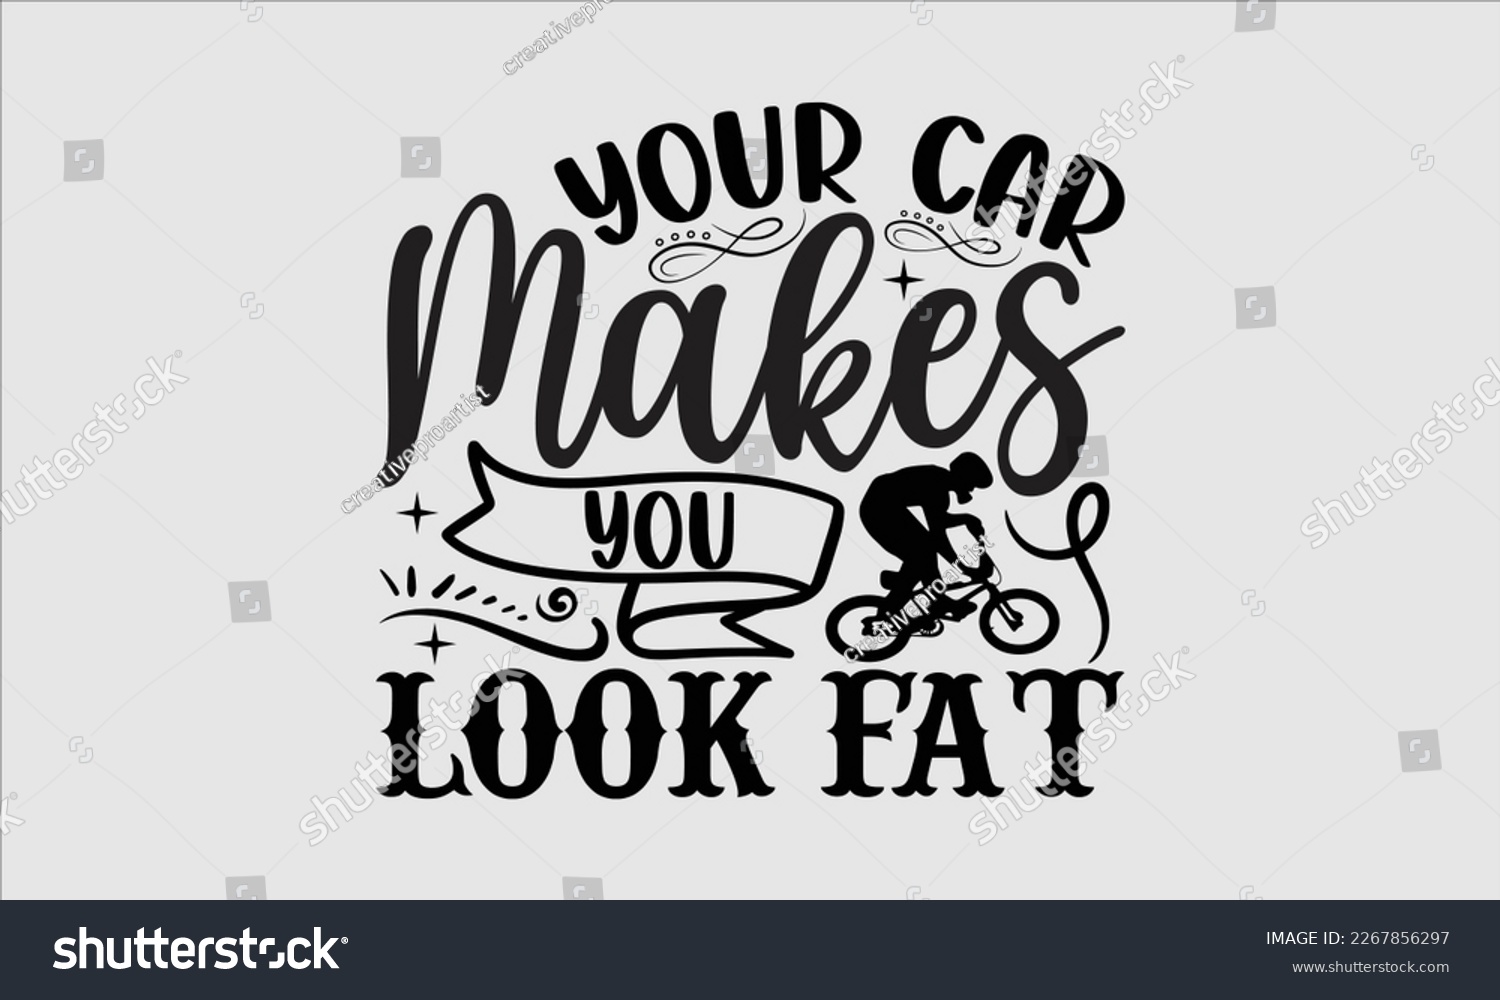 SVG of Your car makes you look fat- Sycle t-shirt design, Hand drawn lettering phrase, Illustration for prints on svg and bags, posters. Handmade calligraphy vector illustration, white background. eps 10 svg